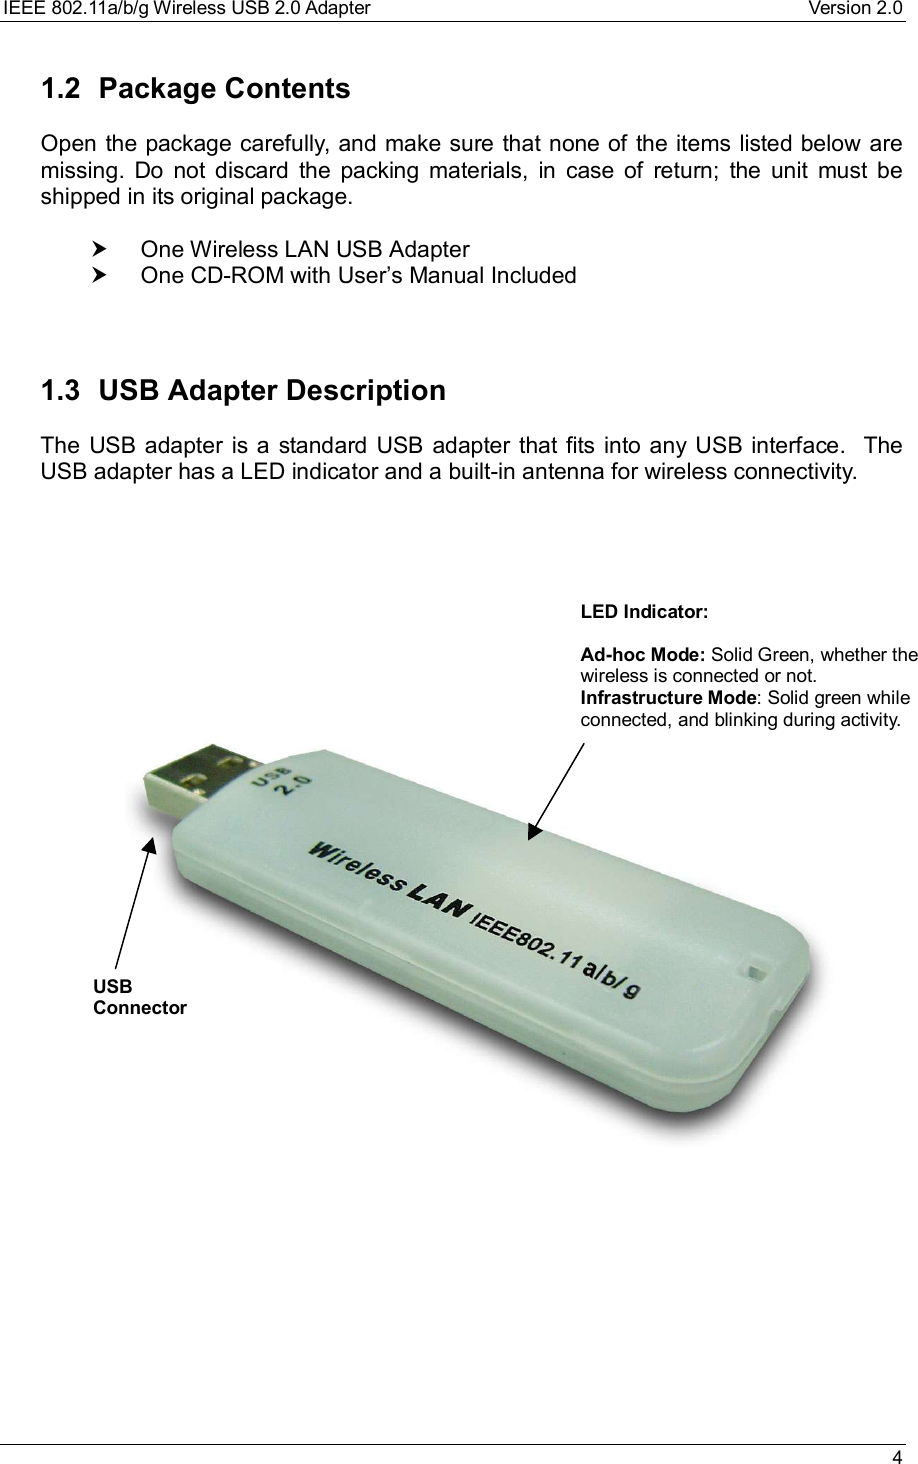 IEEE 802.11a/b/g Wireless USB 2.0 Adapter Version 2.0 41.2 Package ContentsOpen the package carefully, and make sure that none of the items listed below aremissing. Do not discard the packing materials, in case of return; the unit must beshipped in its original package.† One Wireless LAN USB Adapter† One CD-ROM with User’s Manual Included1.3 USB Adapter DescriptionThe USB adapter is a standard USB adapter that fits into any USB interface.  TheUSB adapter has a LED indicator and a built-in antenna for wireless connectivity.USBConnectorLED Indicator:Ad-hoc Mode: Solid Green, whether thewireless is connected or not.Infrastructure Mode: Solid green whileconnected, and blinking during activity.